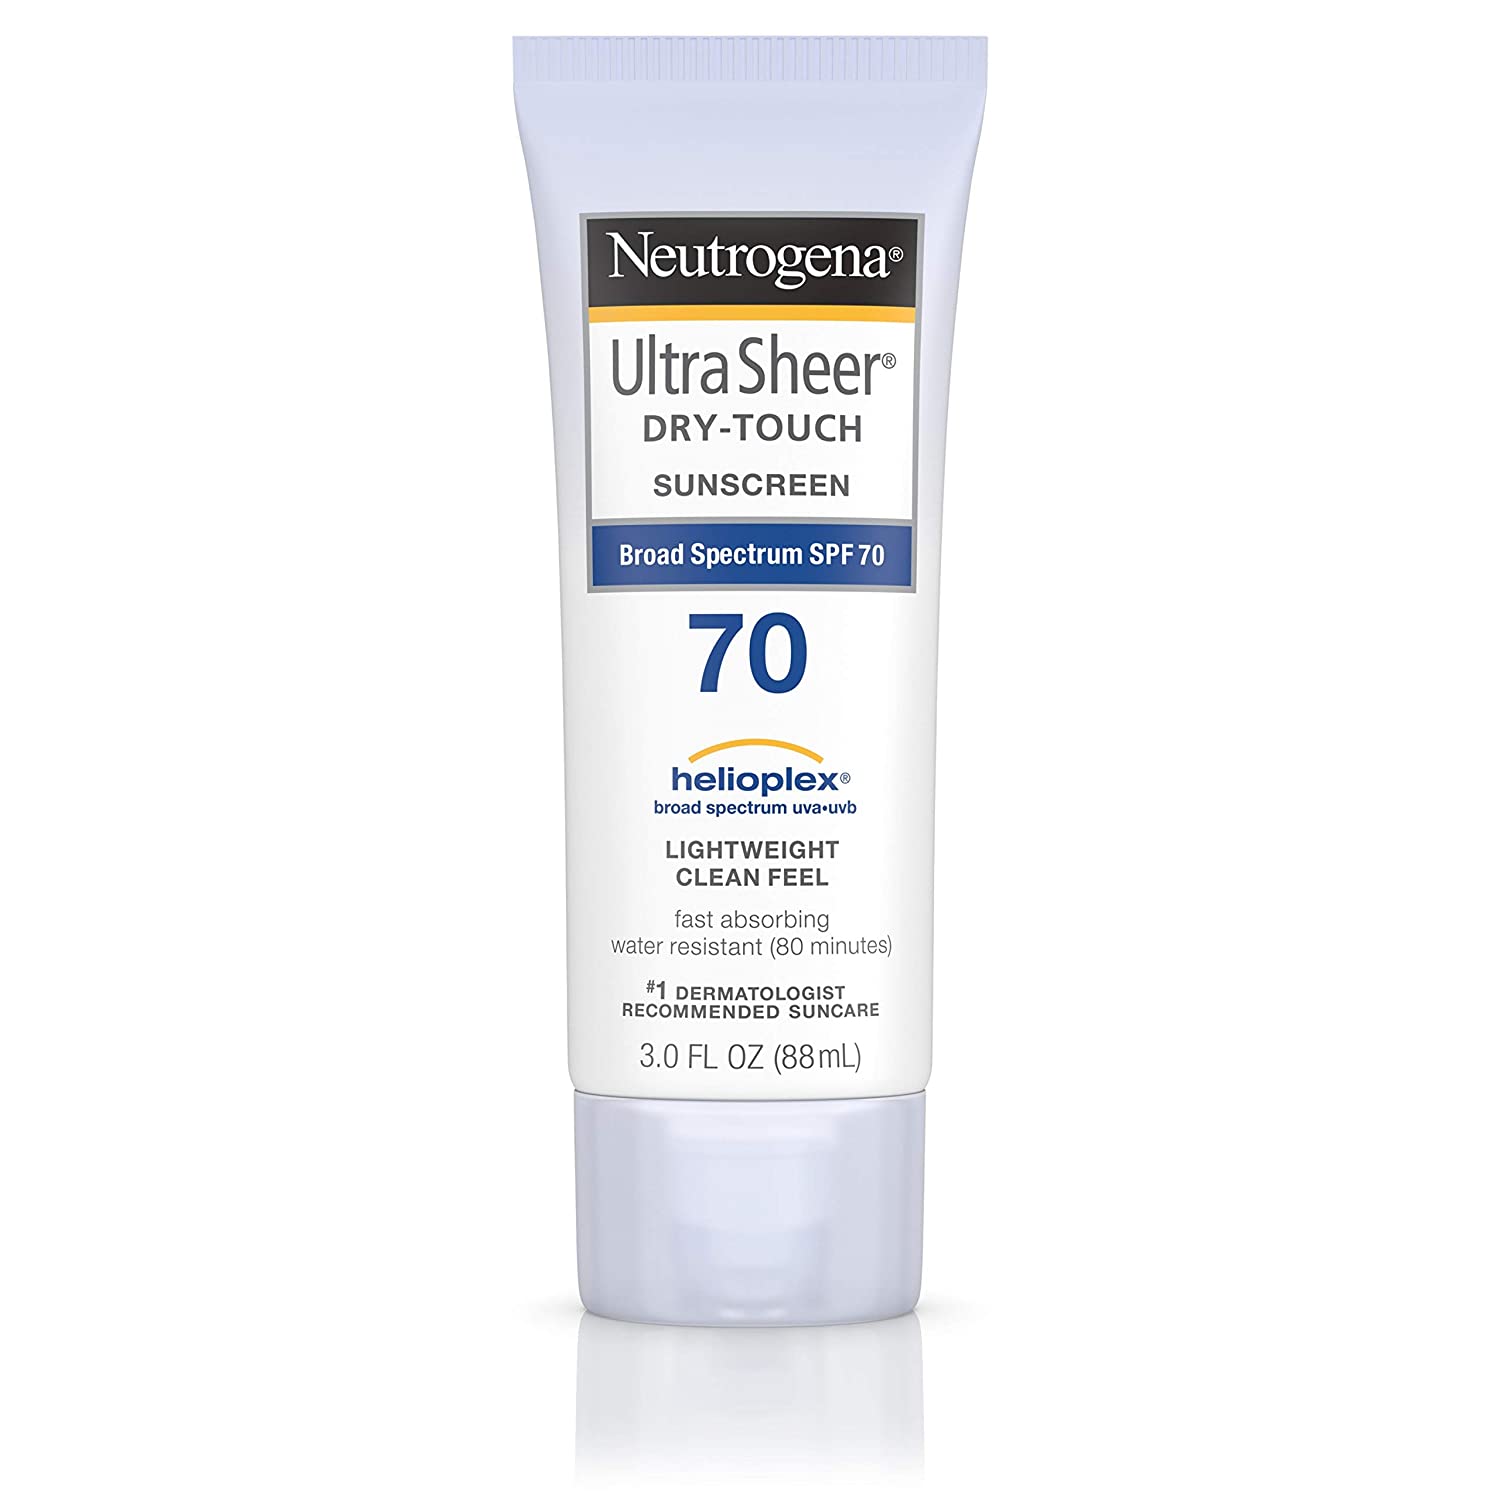 Neutrogena Ultra Sheer Dry-Touch Water Resistant and Non-Greasy Sunscreen Lotion with Broad Spectrum, 3 fl. oz